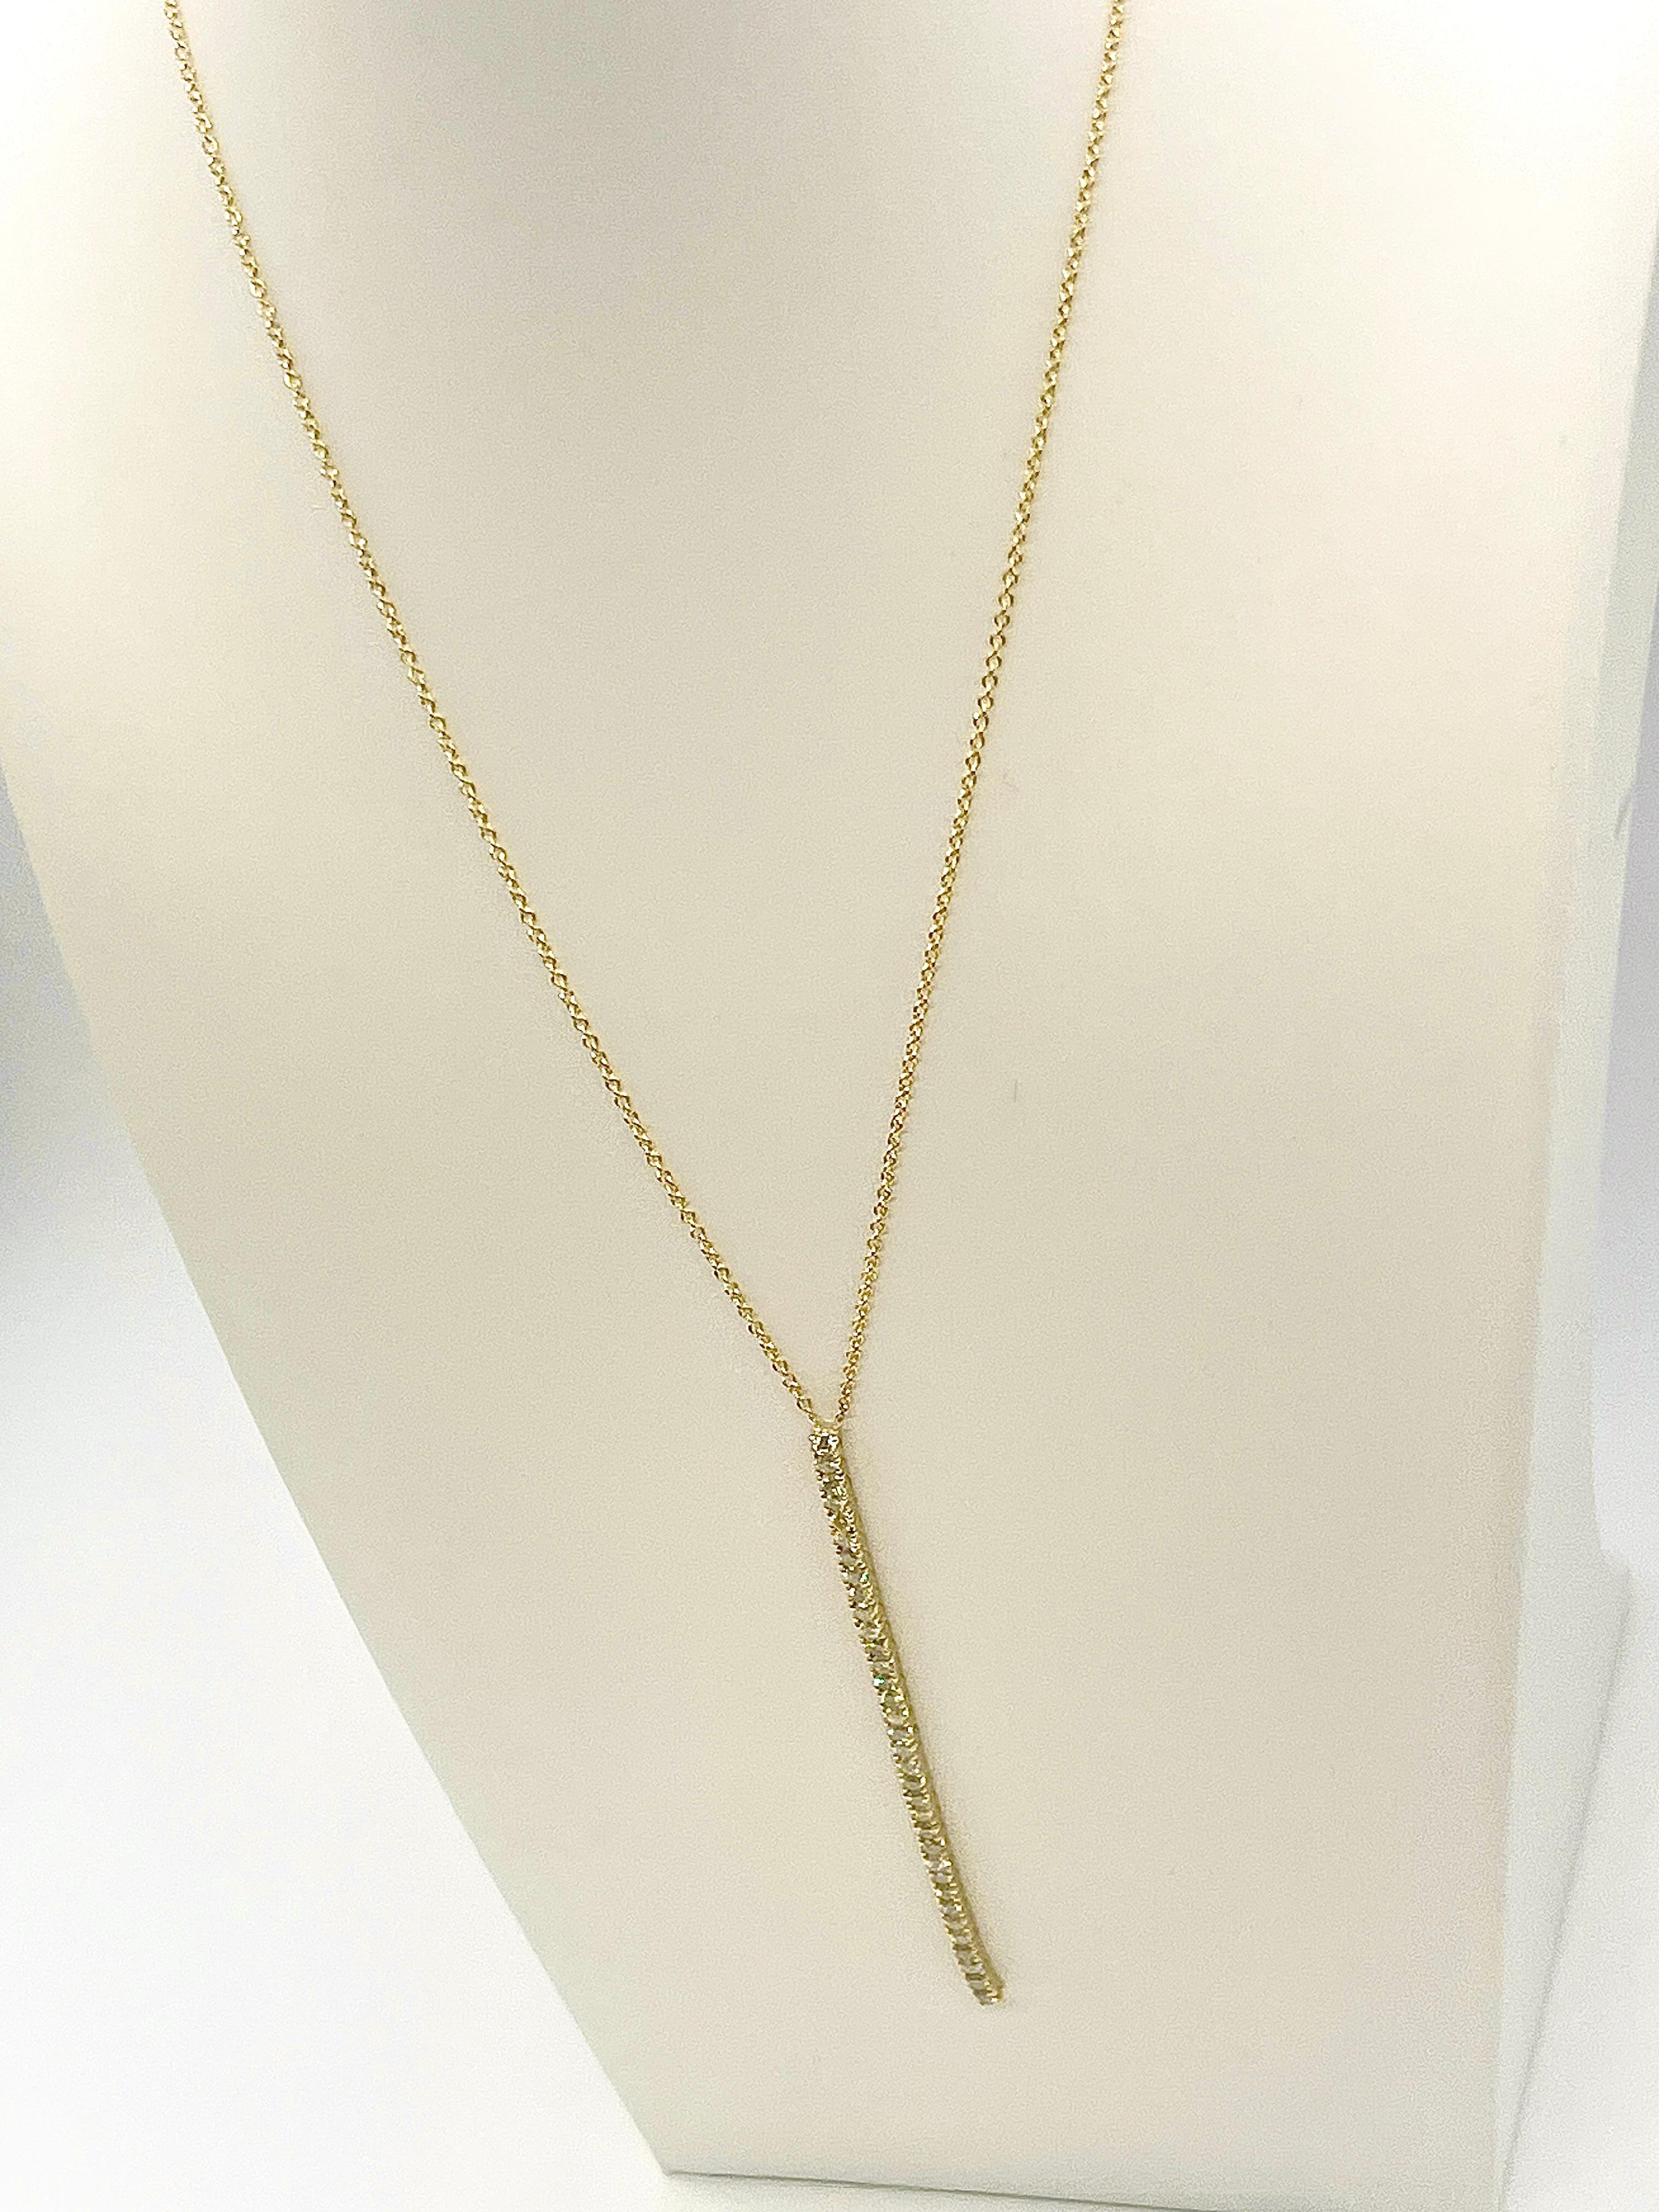 1.41 Carat All Natural Diamond Tennis Drop Necklace in 14K Yellow Gold For Sale 2